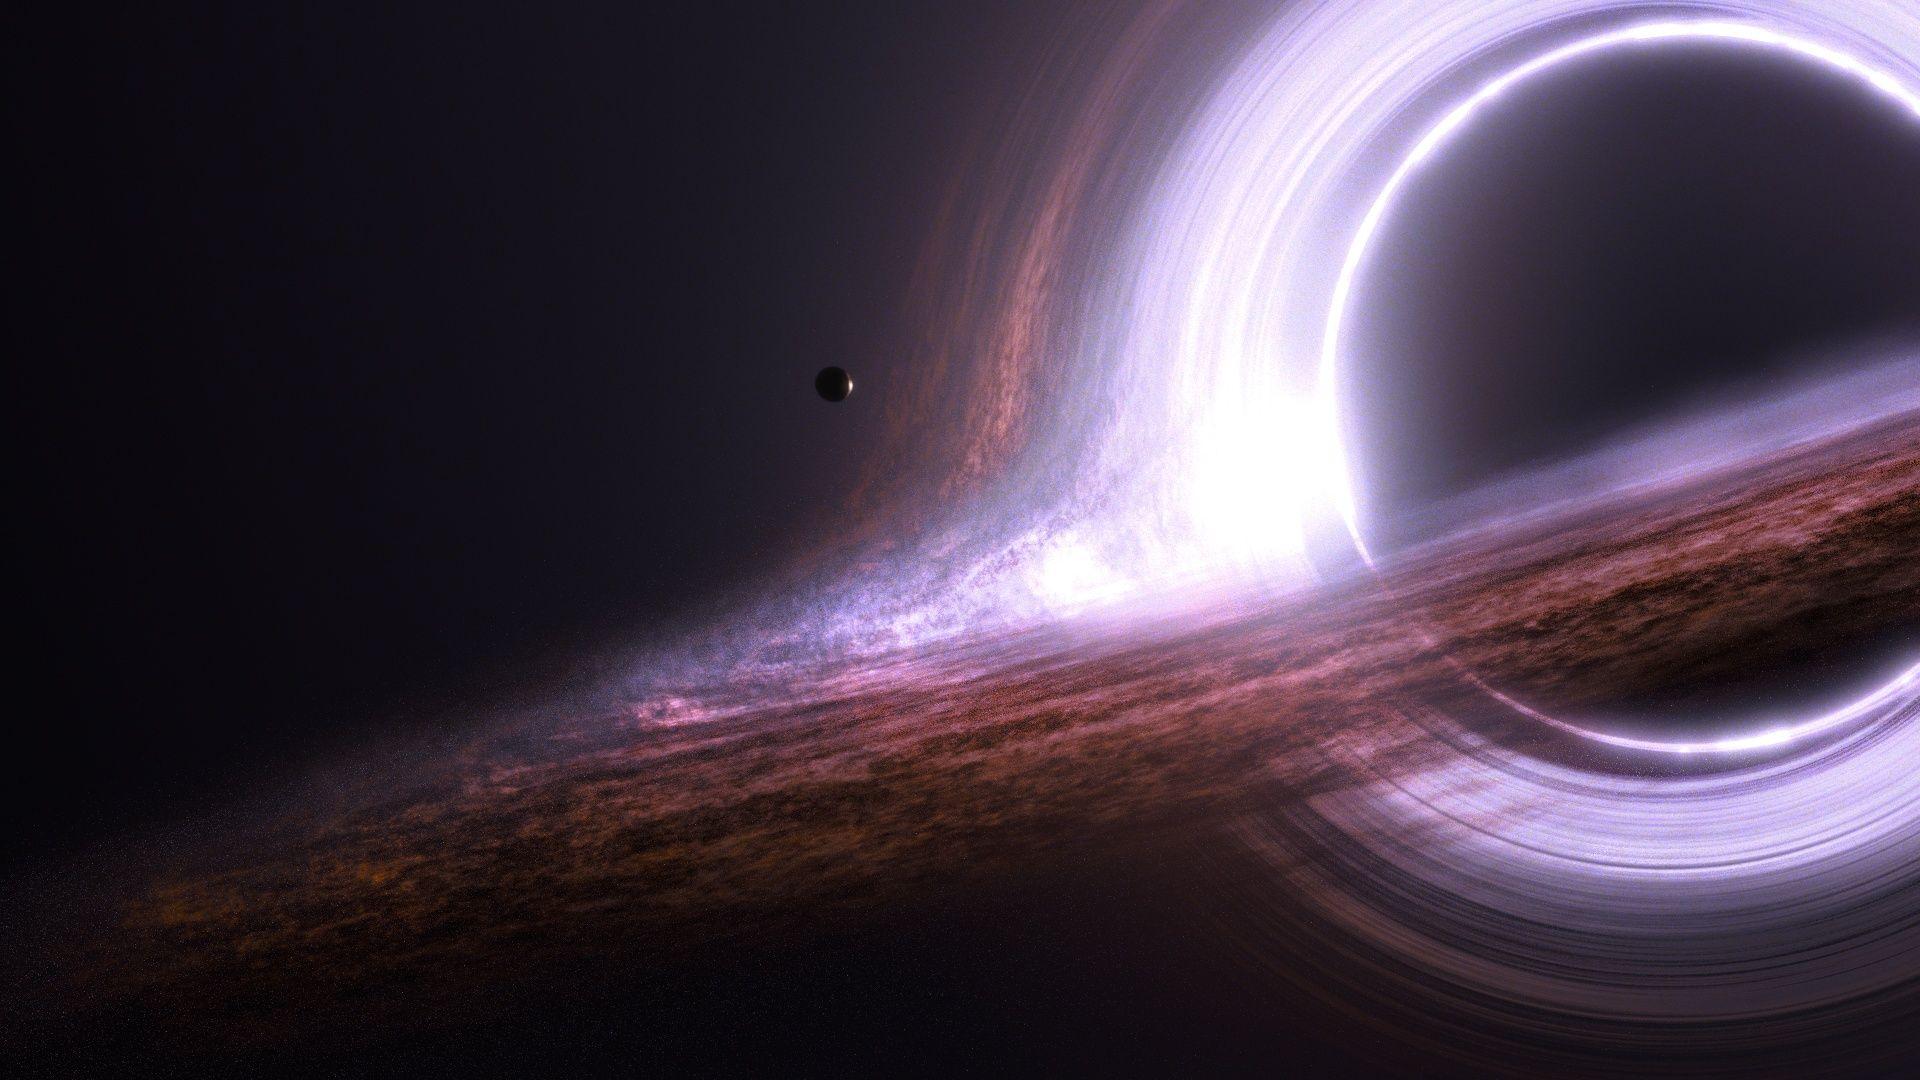  Black  Hole  Wallpapers  Top Free Black  Hole  Backgrounds  